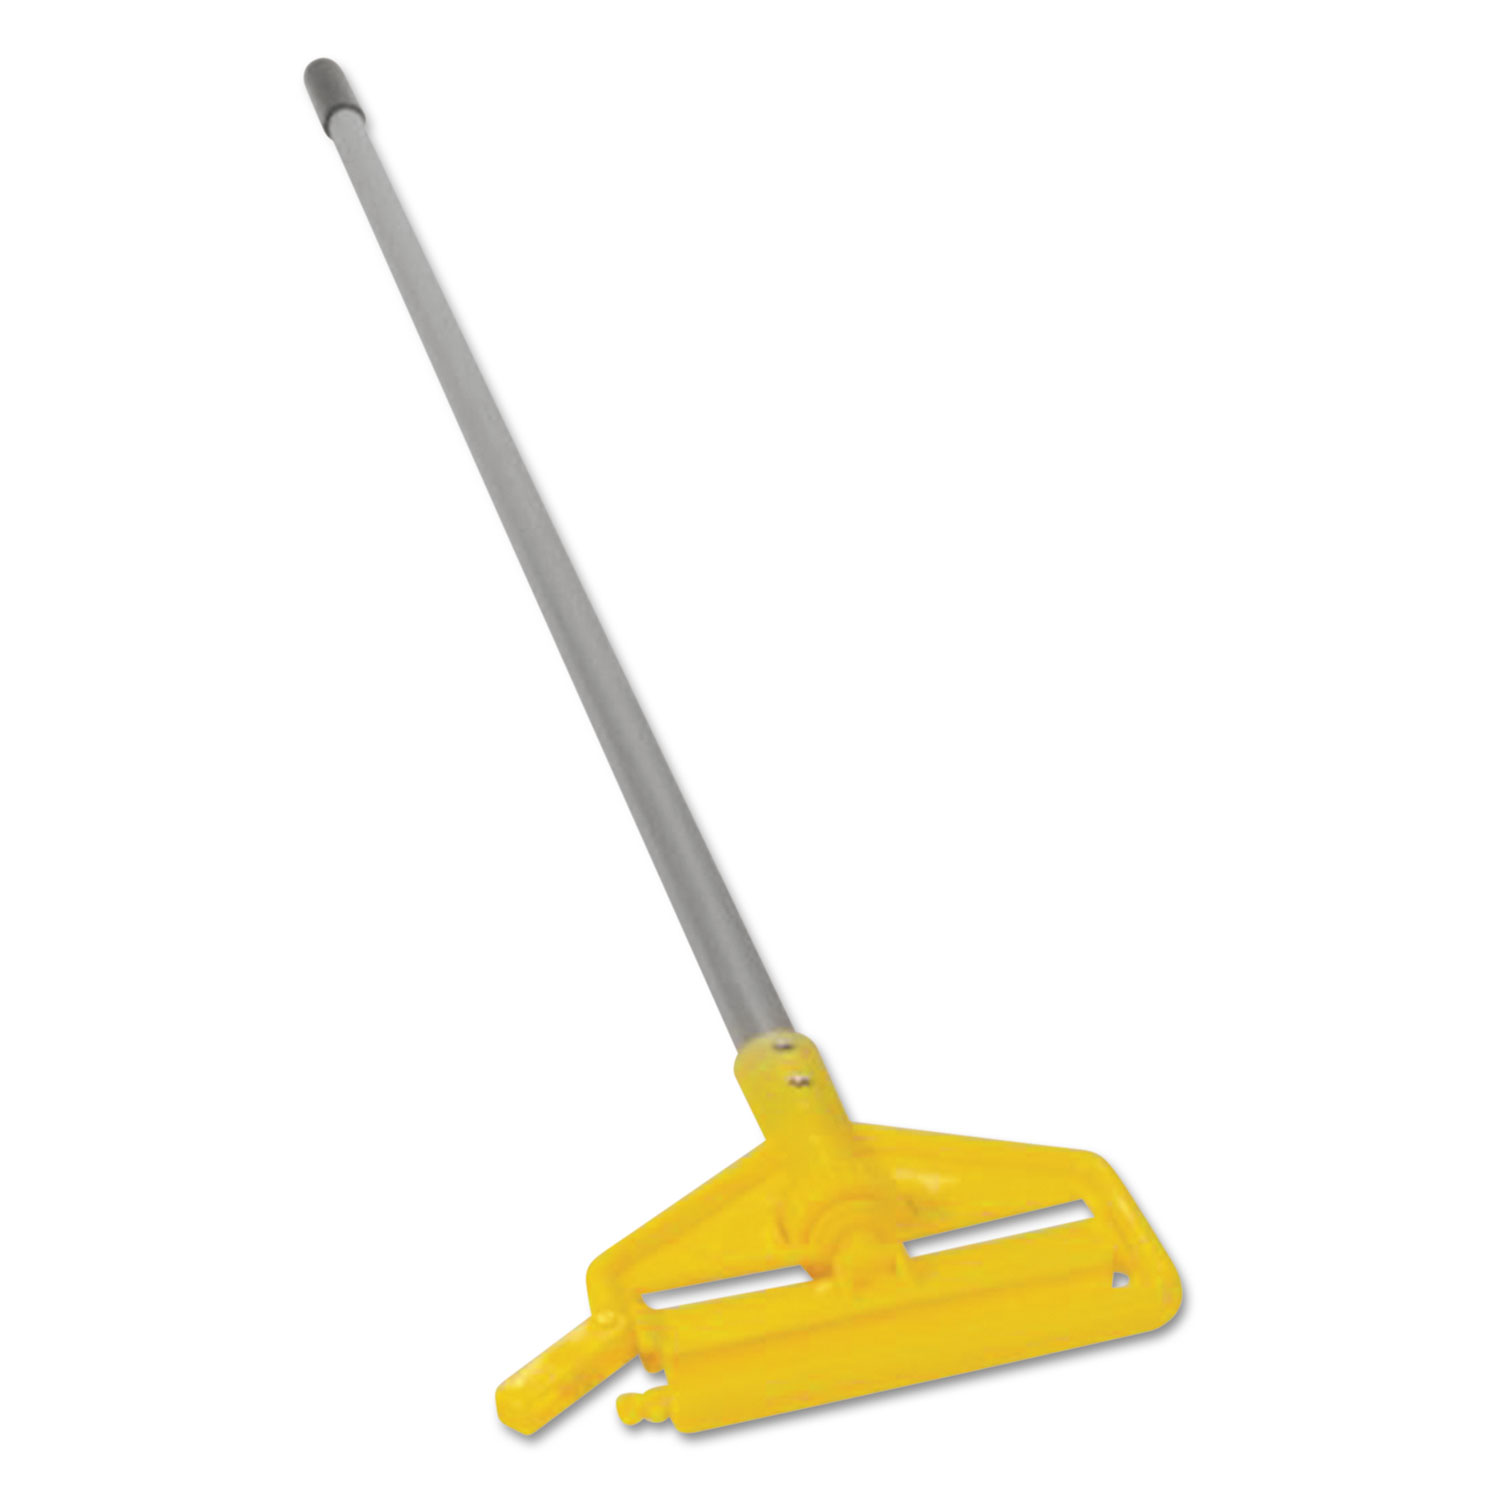  Rubbermaid Commercial H136000000 Invader Aluminum Side-Gate Wet-Mop Handle, 1 dia x 60, Gray/Yellow (RCPH136) 